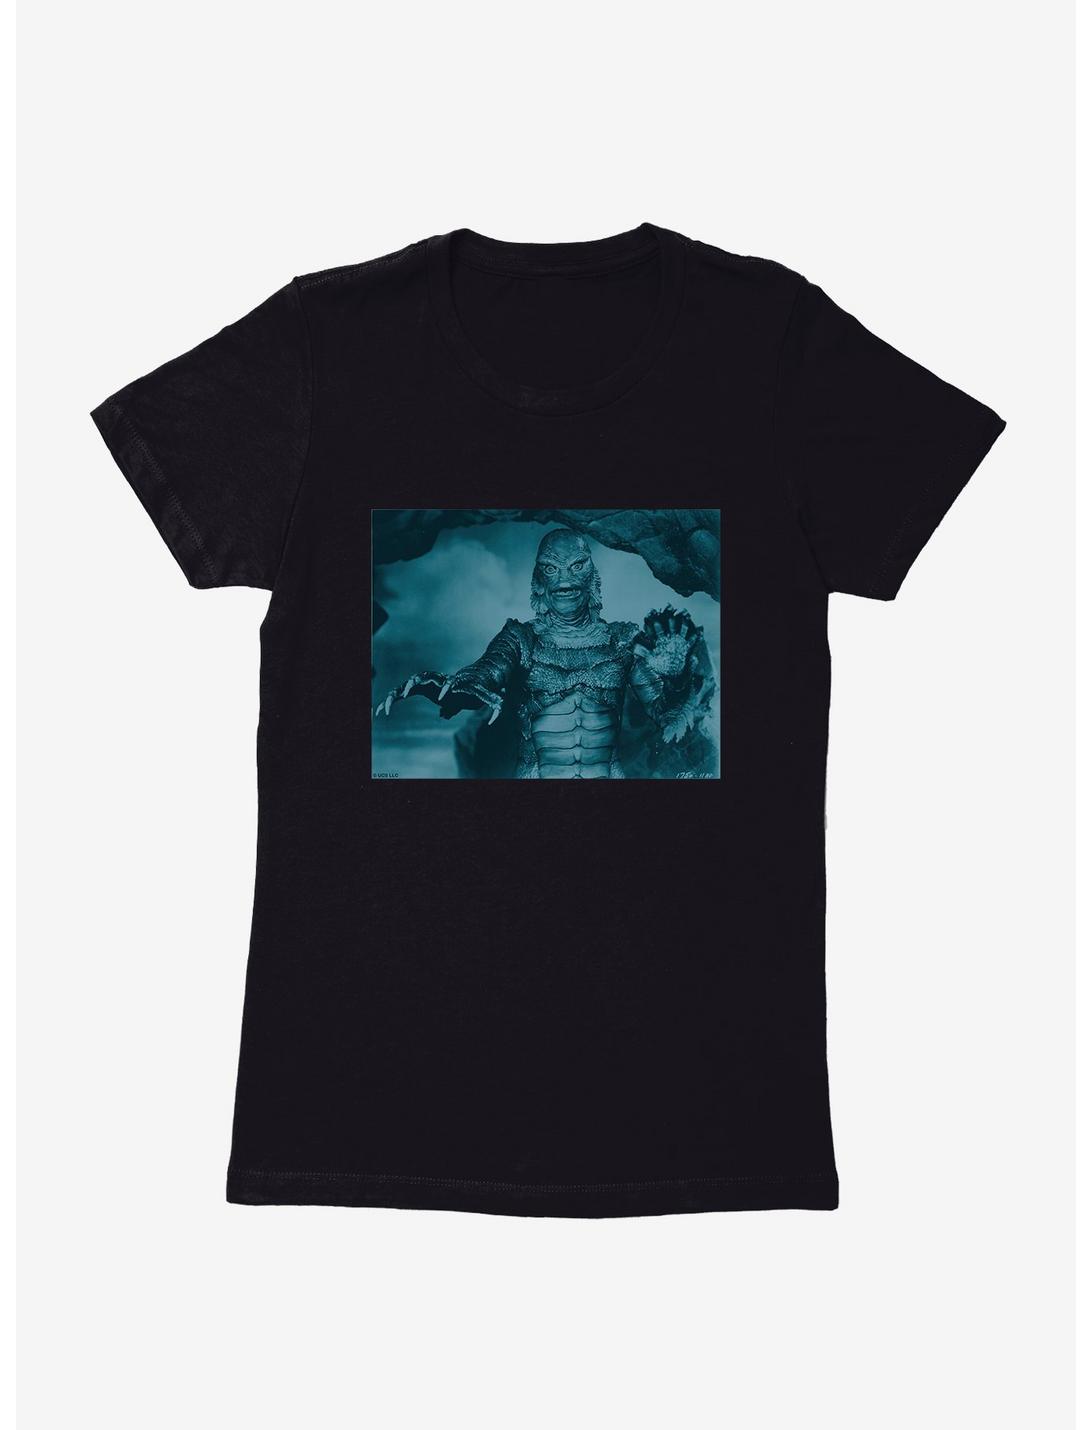 Creature From The Black Lagoon Live Action Blue Scene Womens T-Shirt, BLACK, hi-res